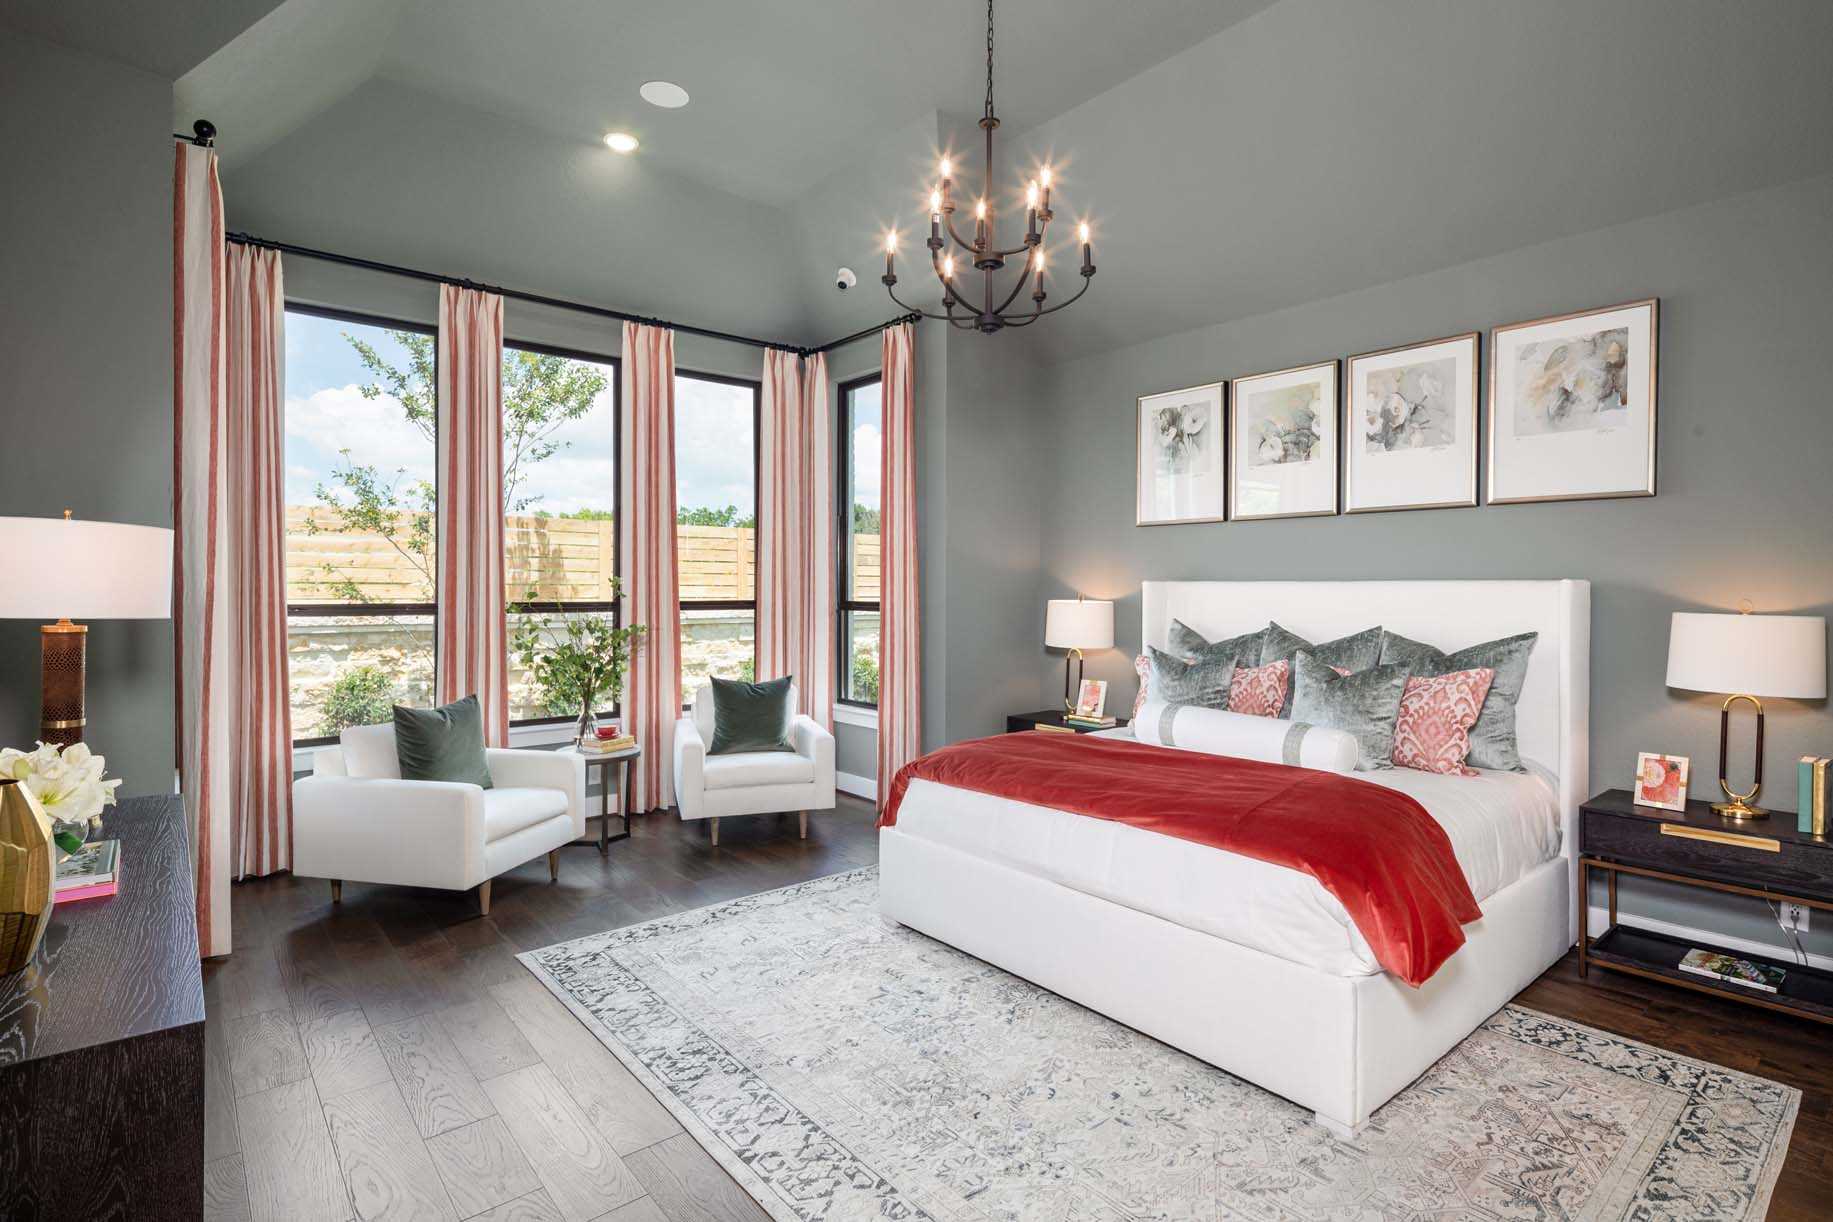 A well-appointed bedroom in one of the new homes in New Braunfels, featuring a king-sized bed, gray walls, large windows, and elegant decor.